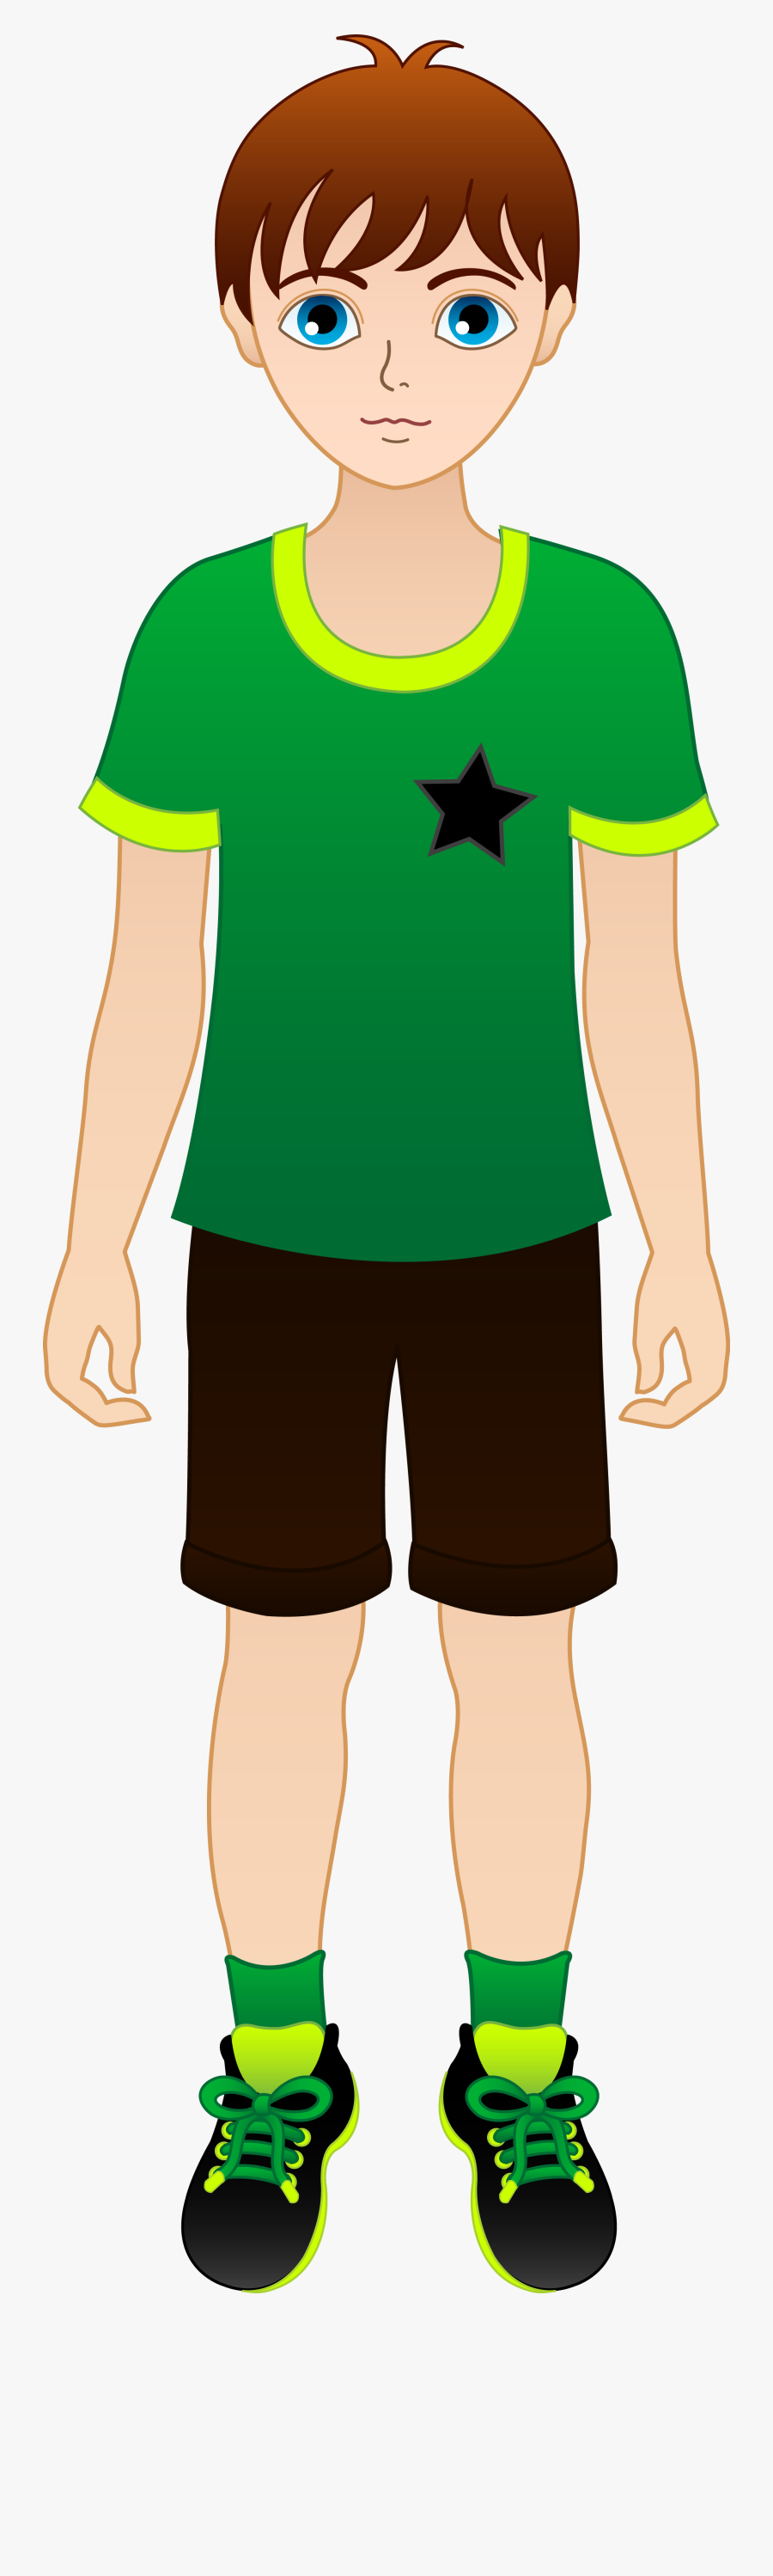 Brown Haired Boy Clipart, Transparent Clipart